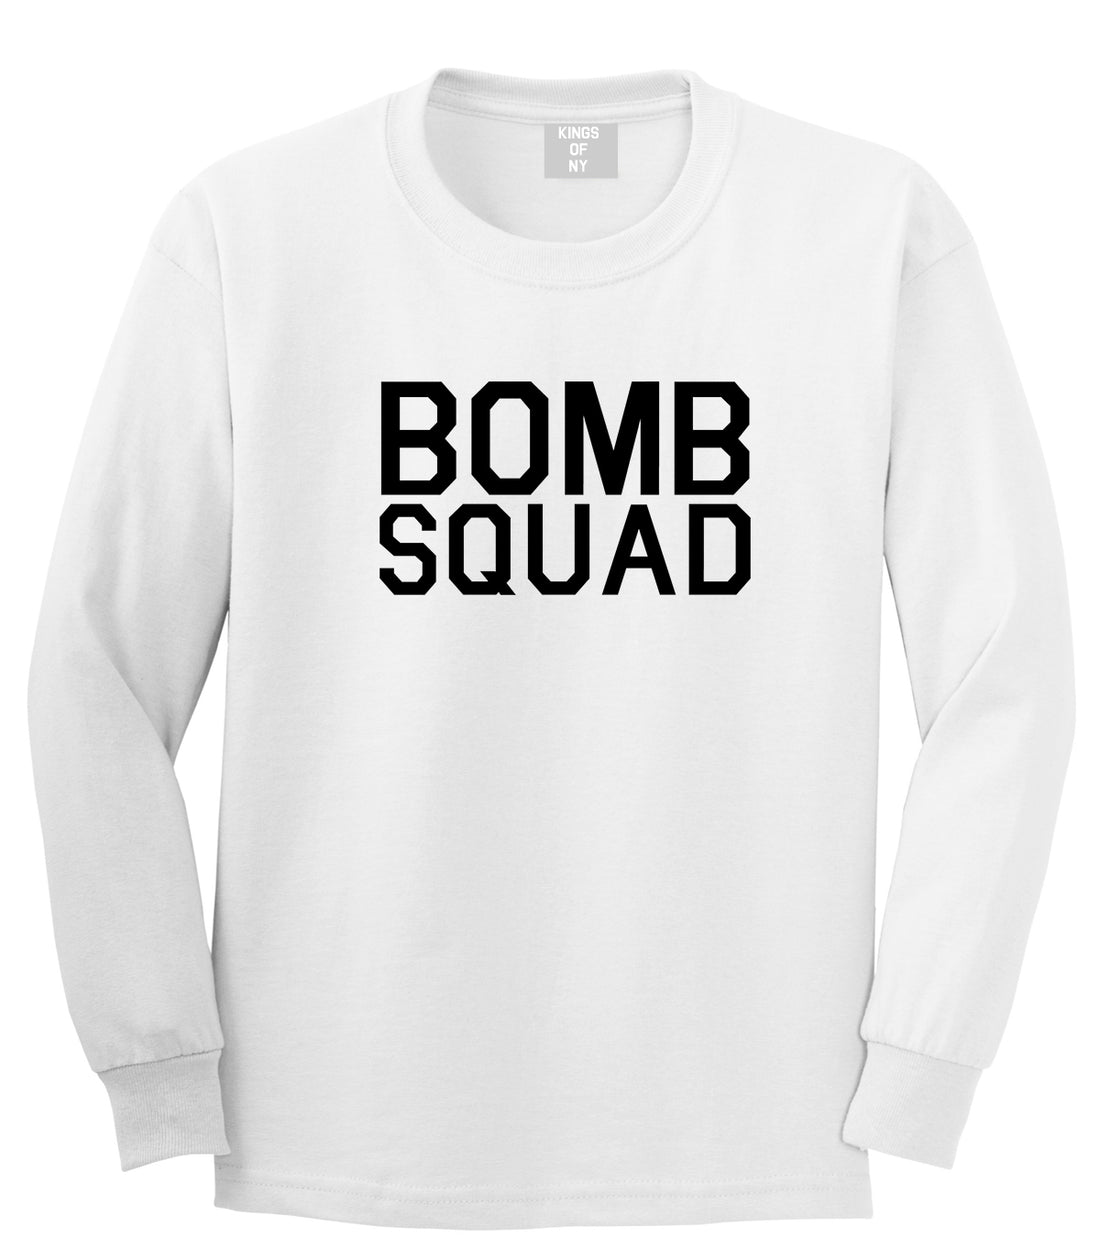 Bomb Squad White Long Sleeve T-Shirt by Kings Of NY